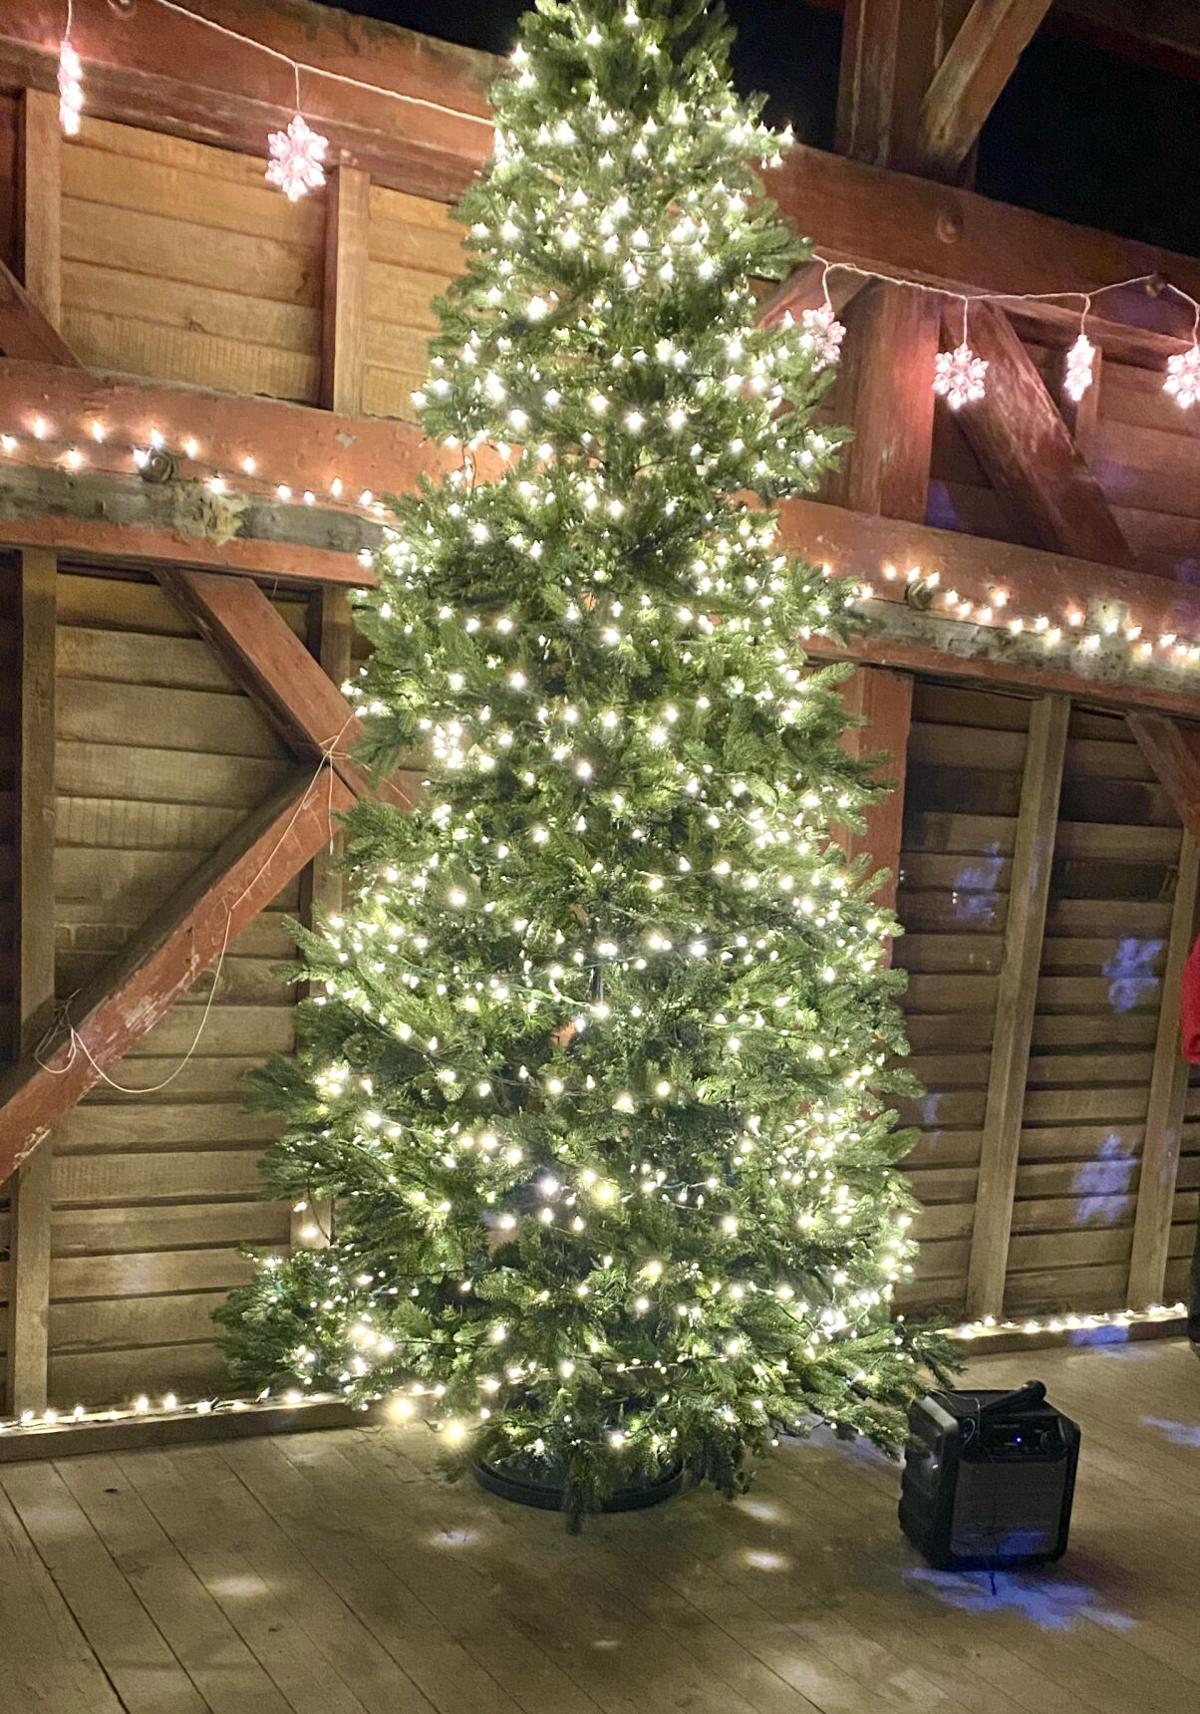 Christmas tree was front and center for Barrackville's covered bridge lighting